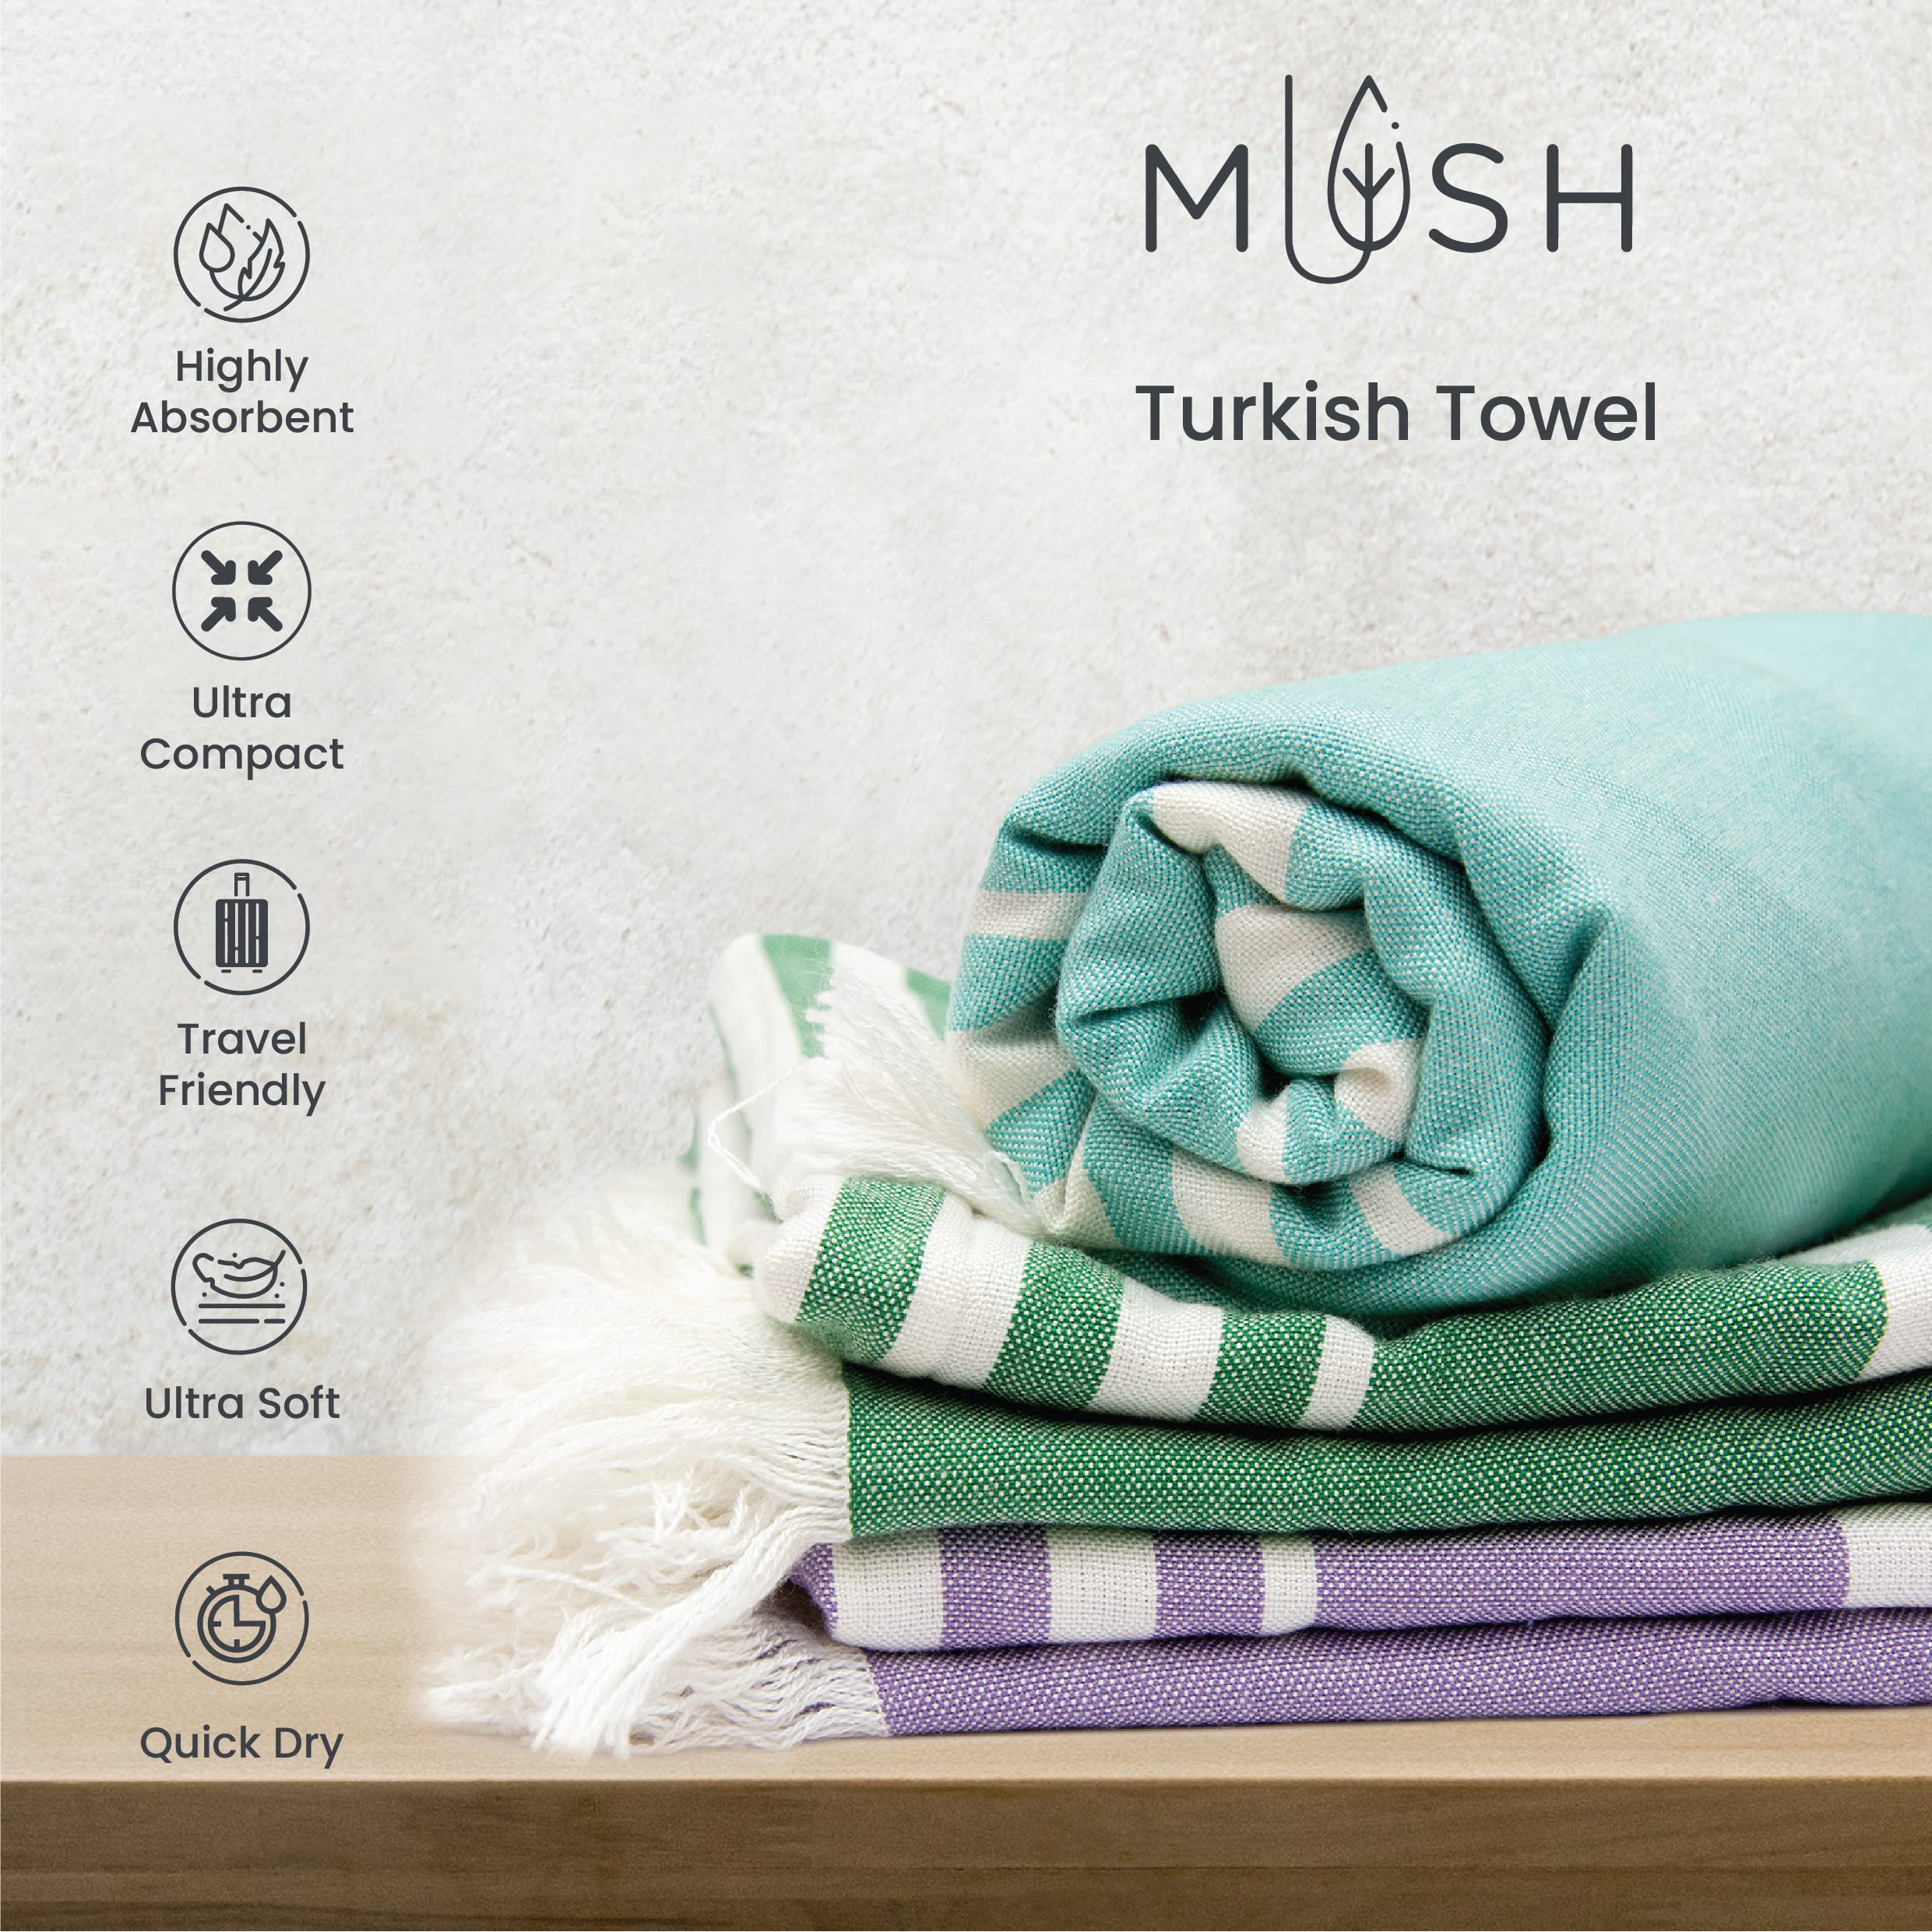 Mush 100% Bamboo Light Weight & Ultra-Compact Turkish Towel Super Soft, Absorbent, Quick Dry, Anti-Odor Bamboo Towel for Bath, Travel, Gym, Swim and Workout (2, Peach - Dark Green)